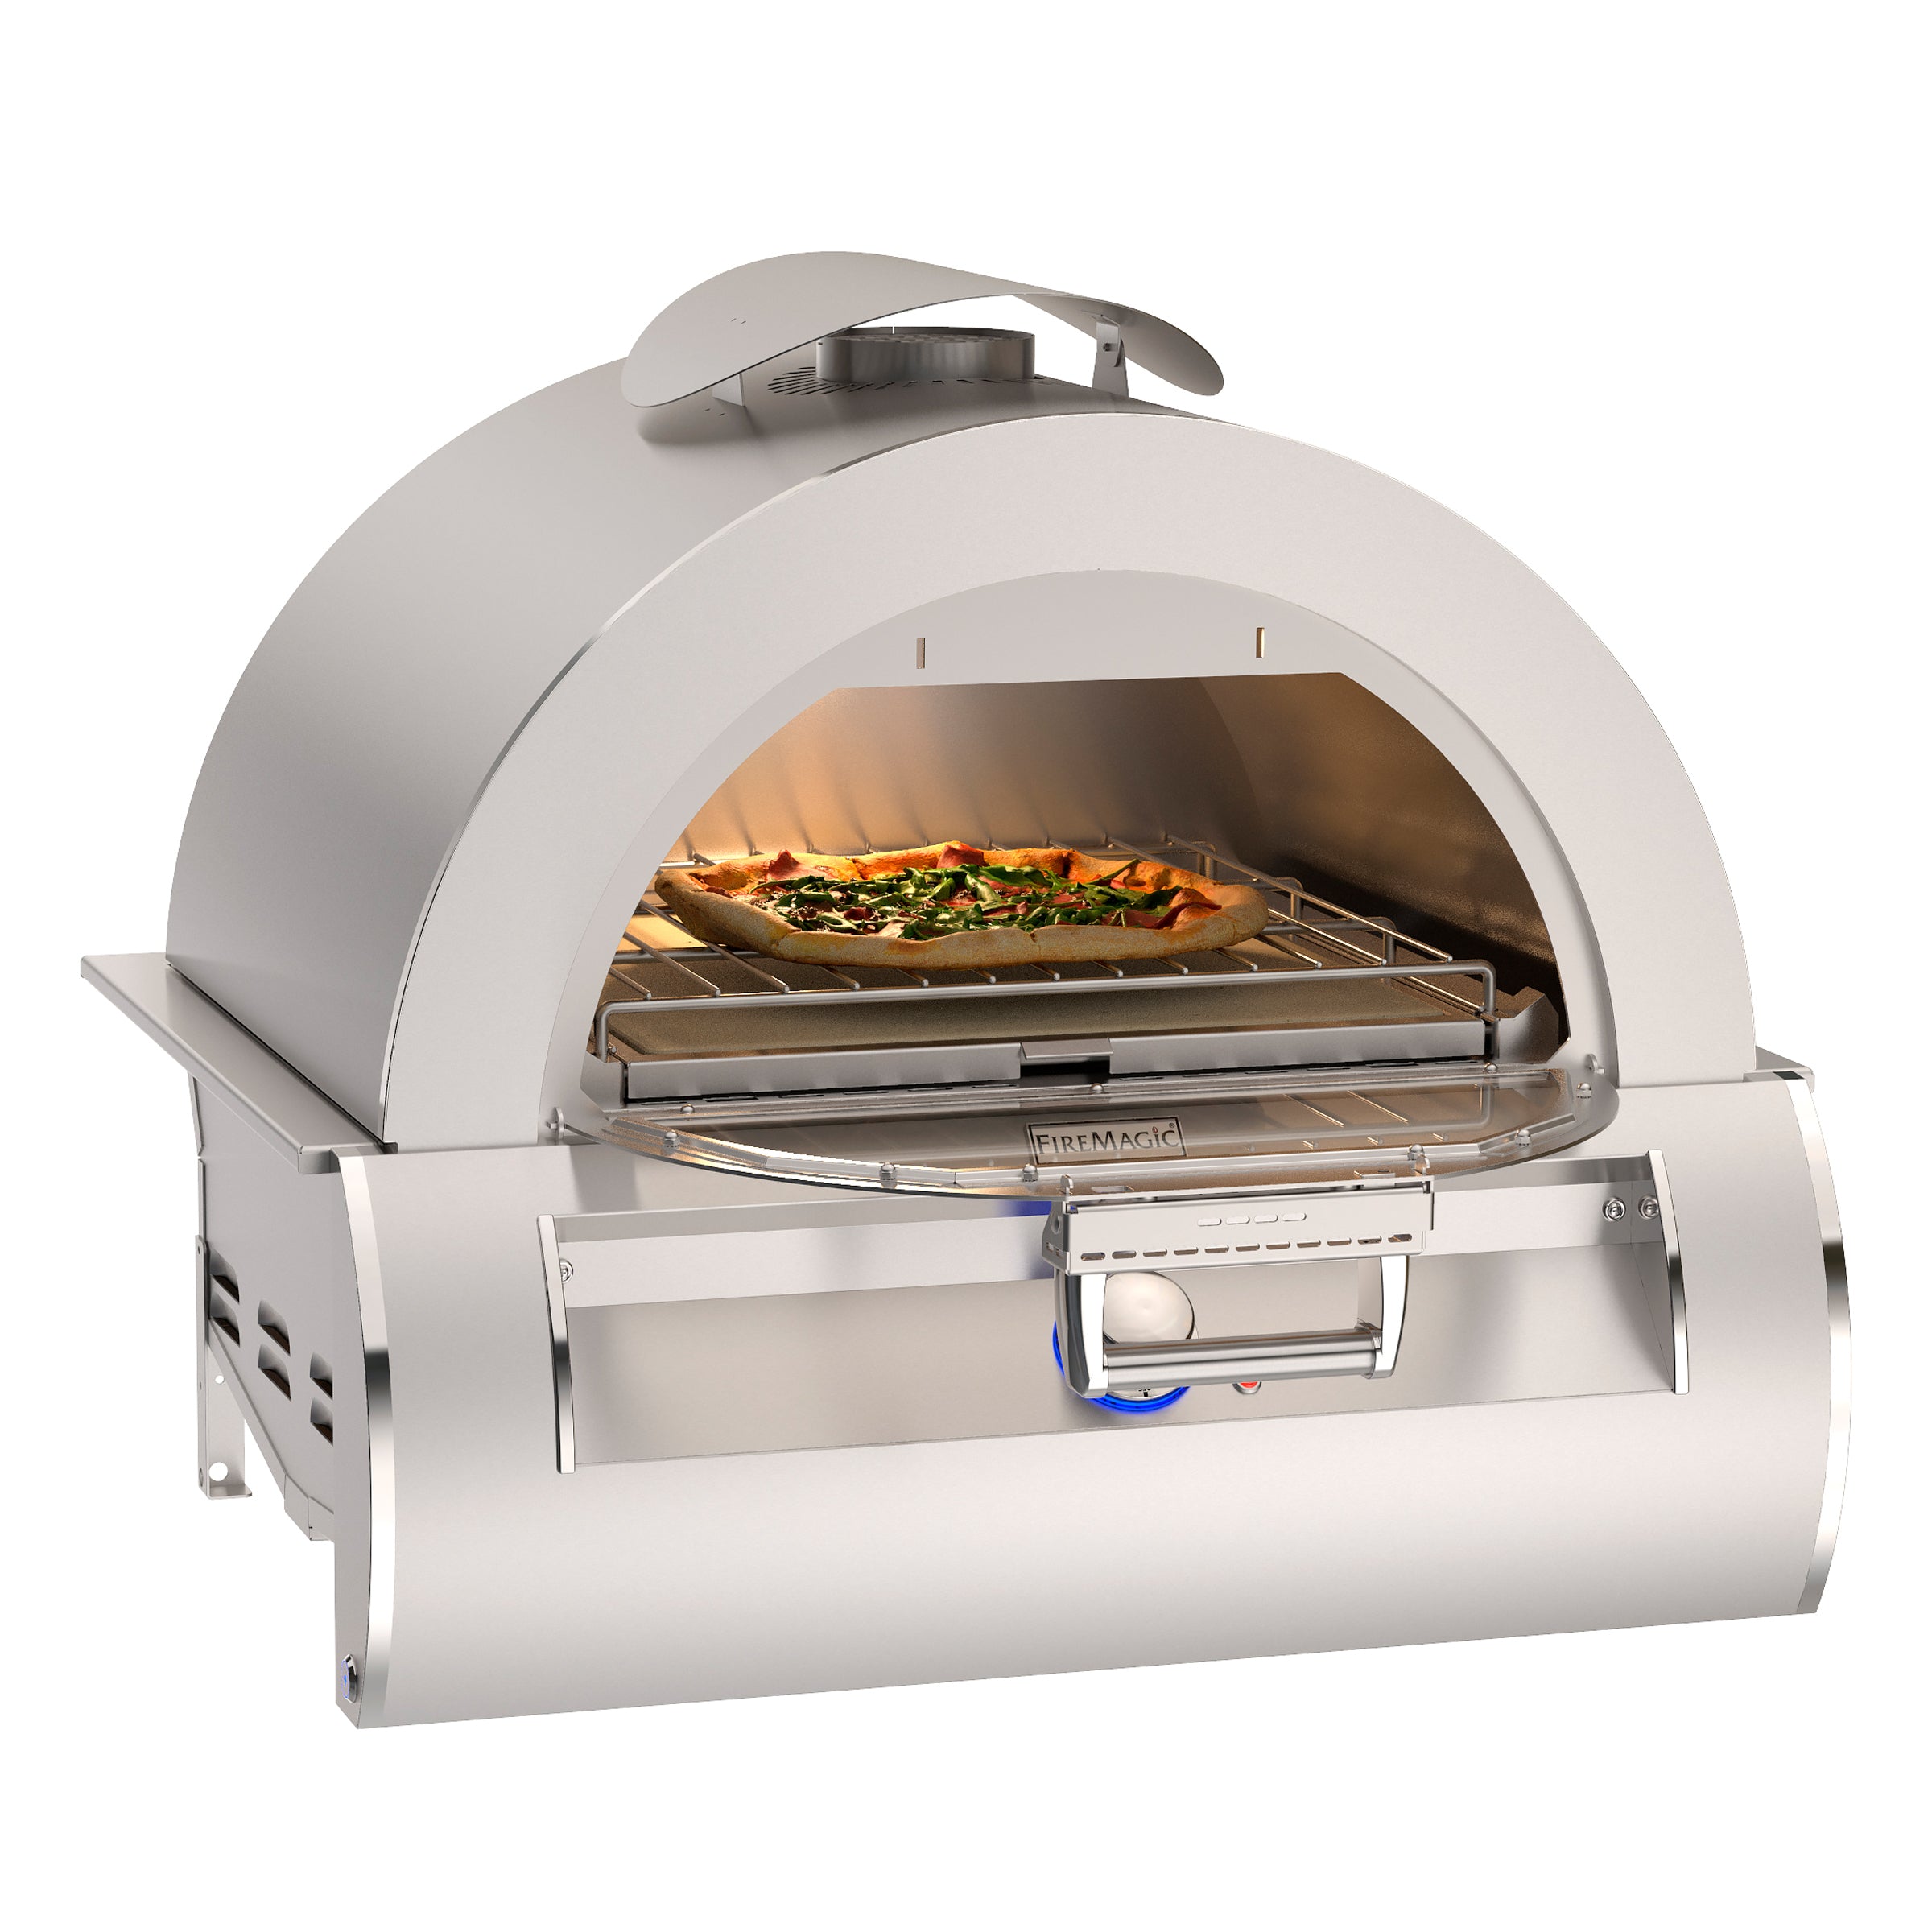 FireMagic | 30" Built-In Pizza Oven - 5600